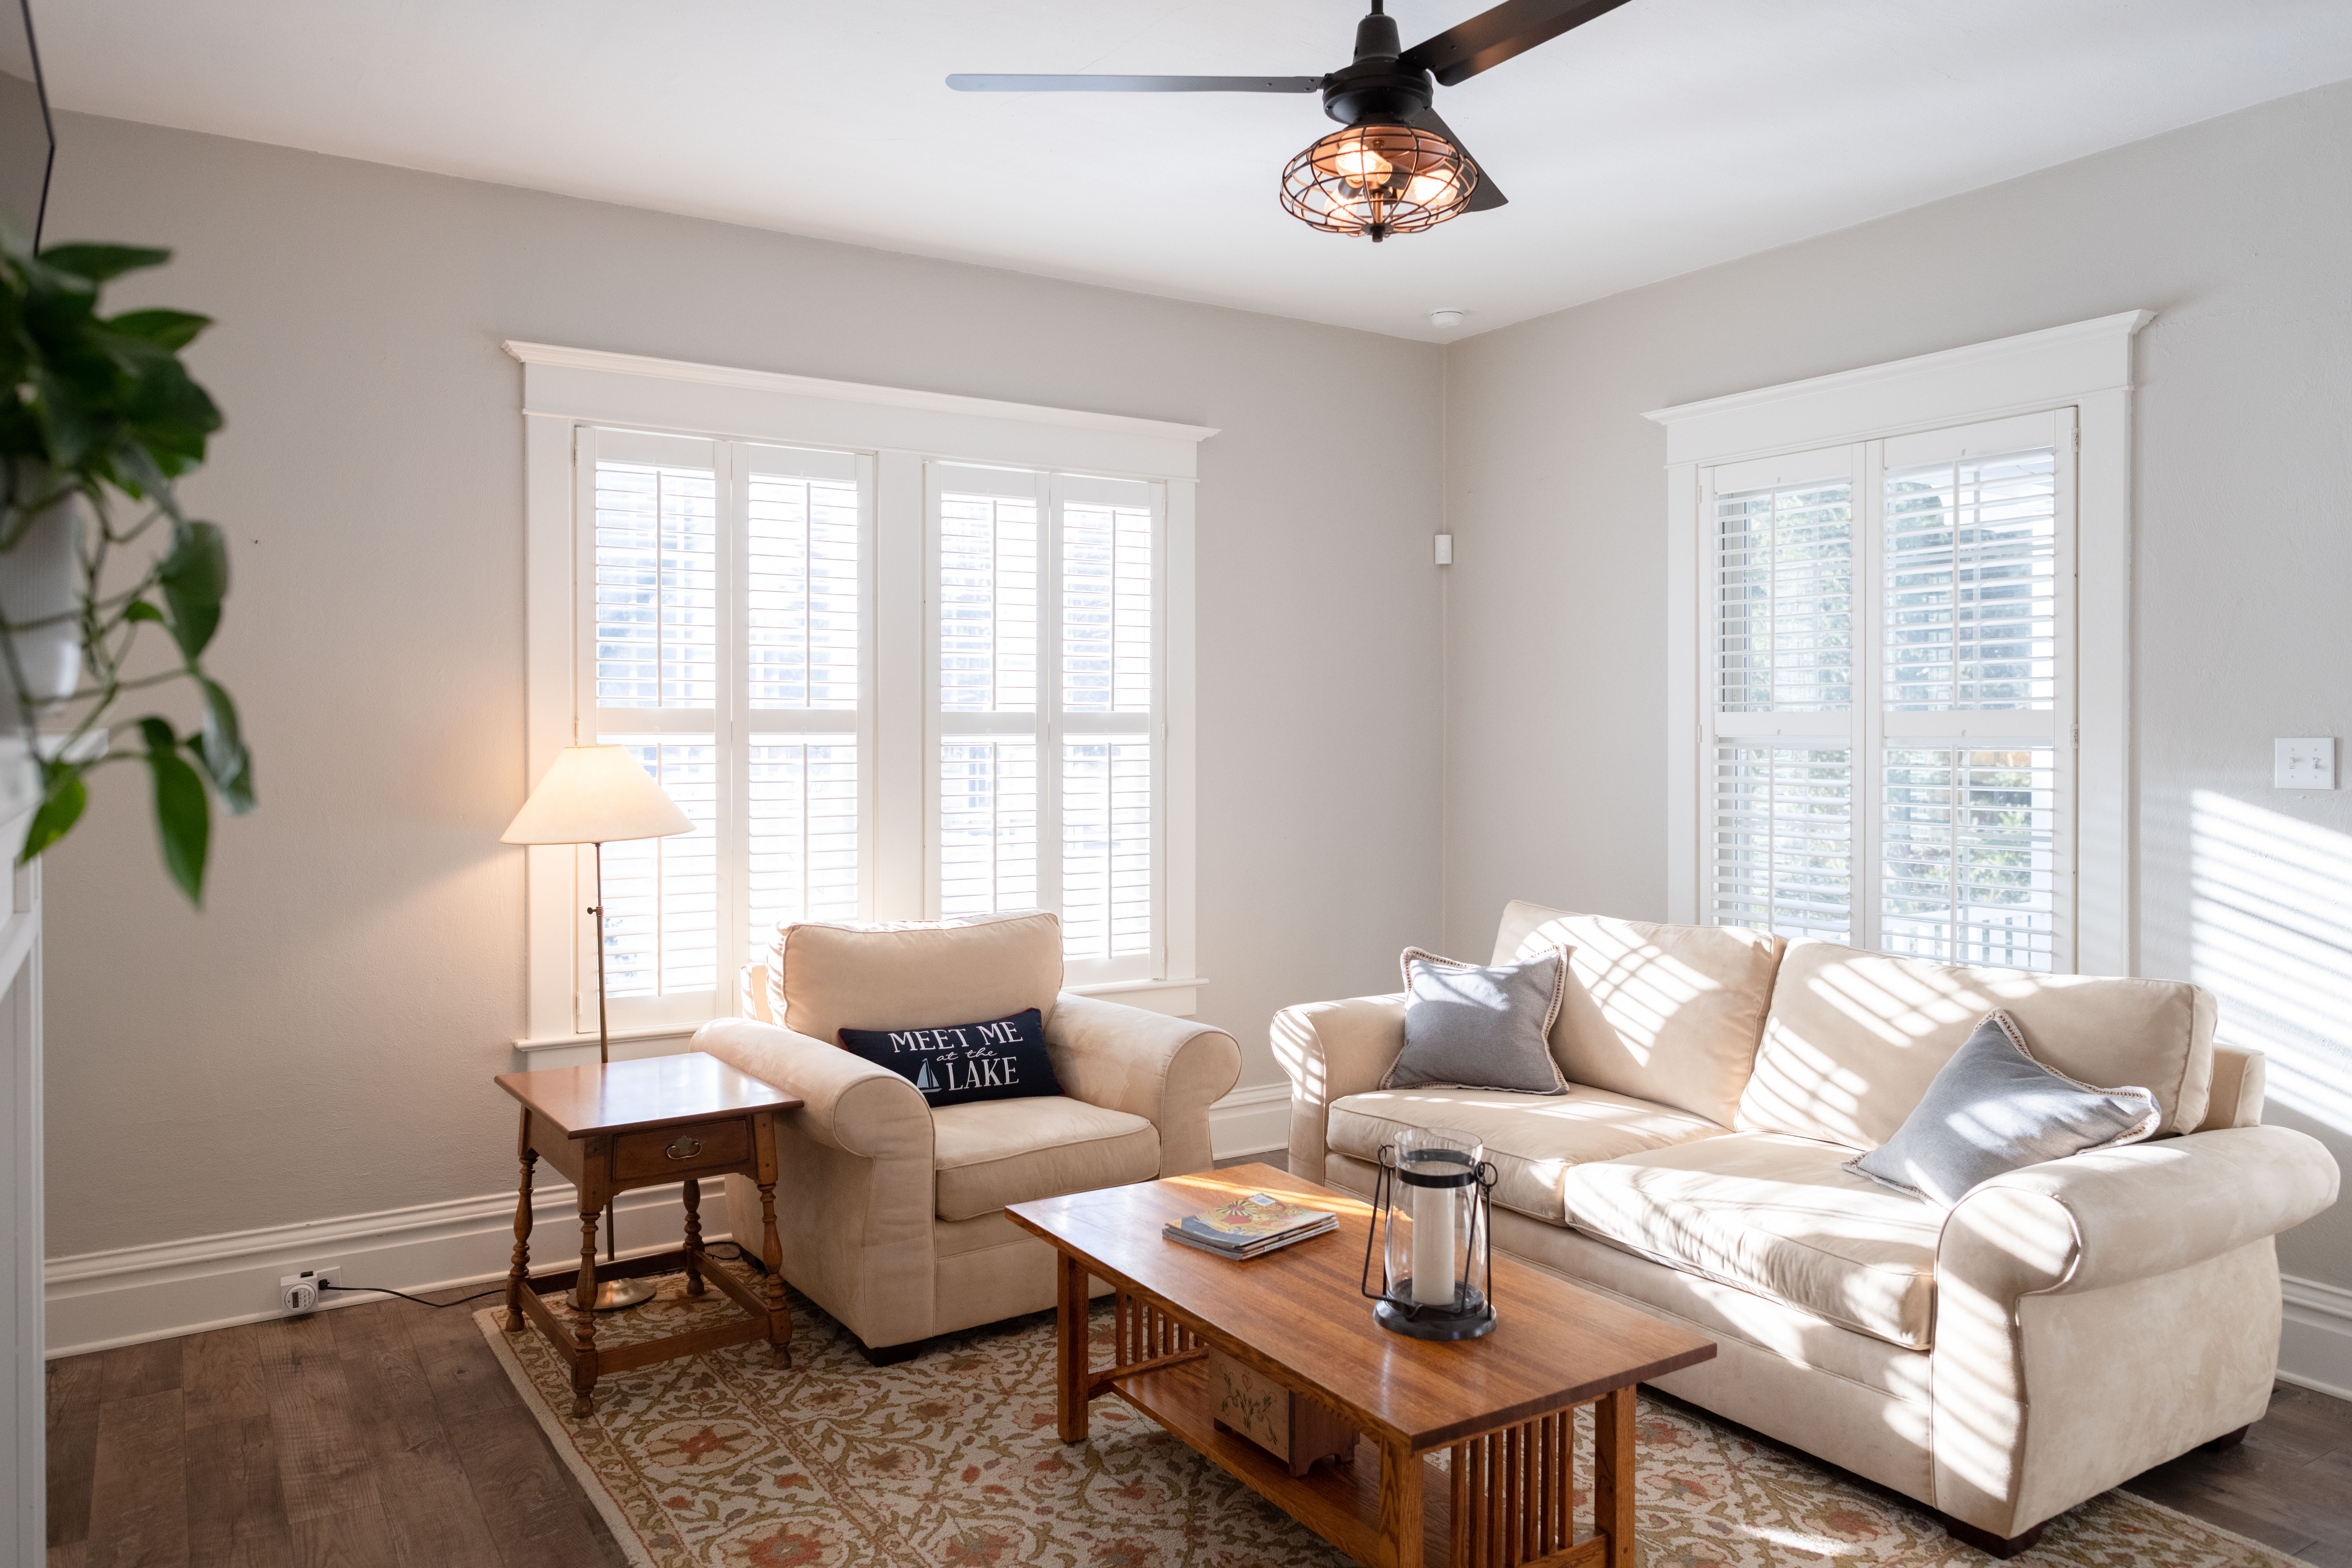 Sunny and relaxed describes the feel of the interior - woods floors, warm whites, comfortable and cozy.